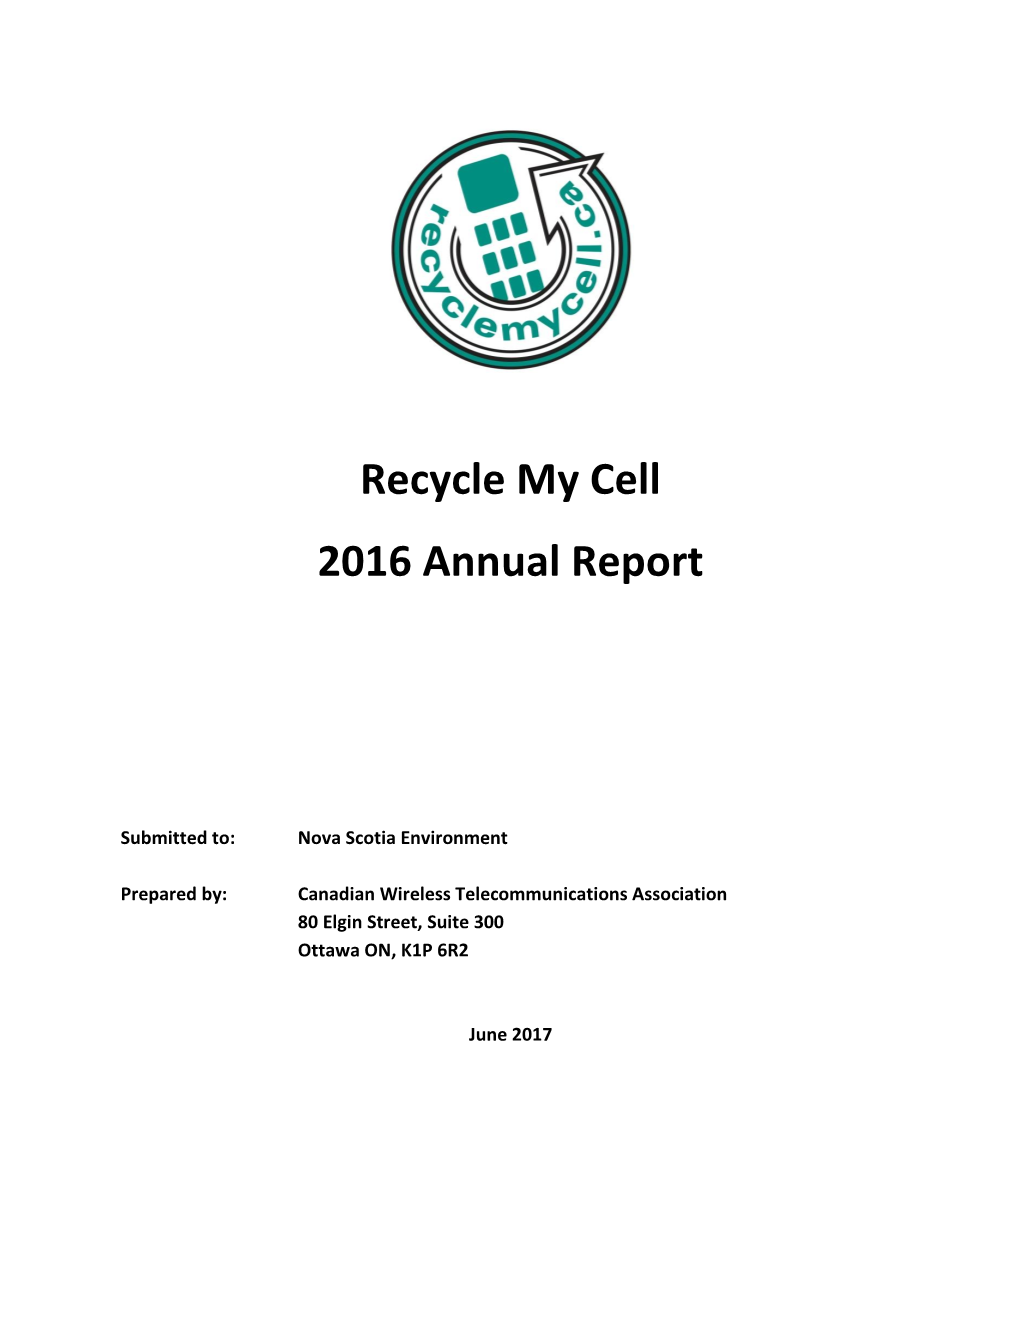 Recycle My Cell 2016 Annual Report